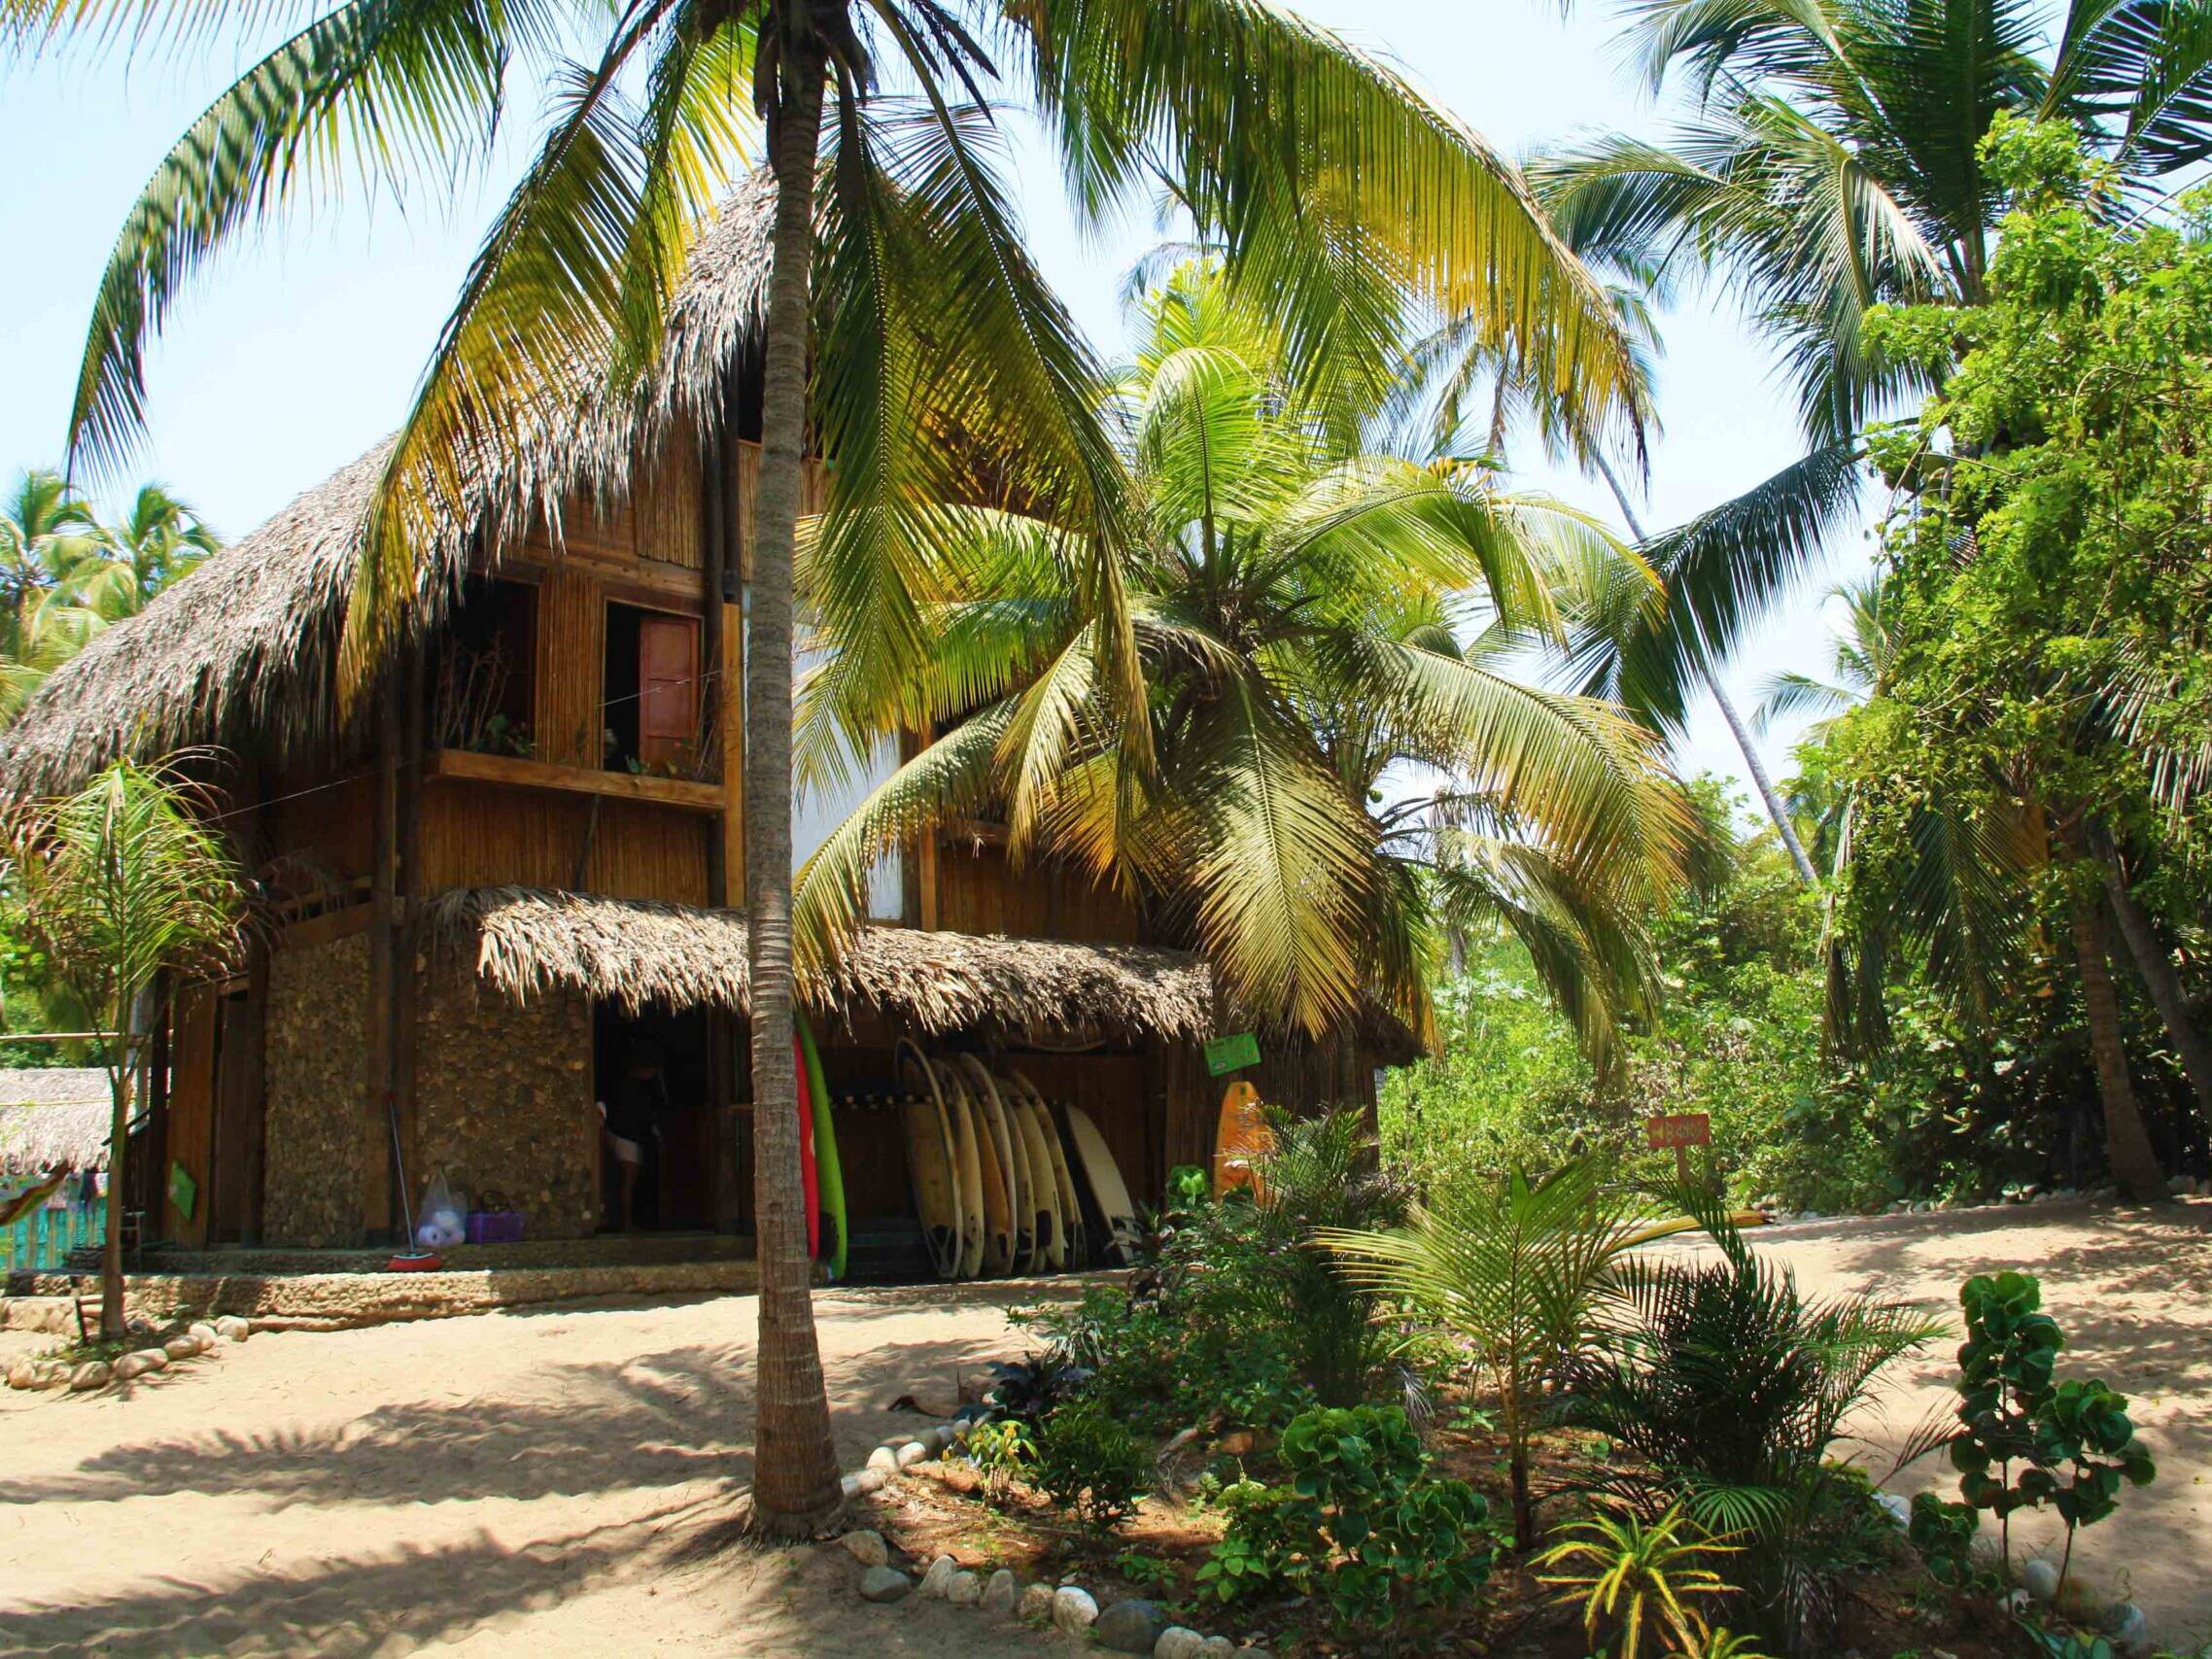 Accommodation at Costeño Beach surf camp Colombia